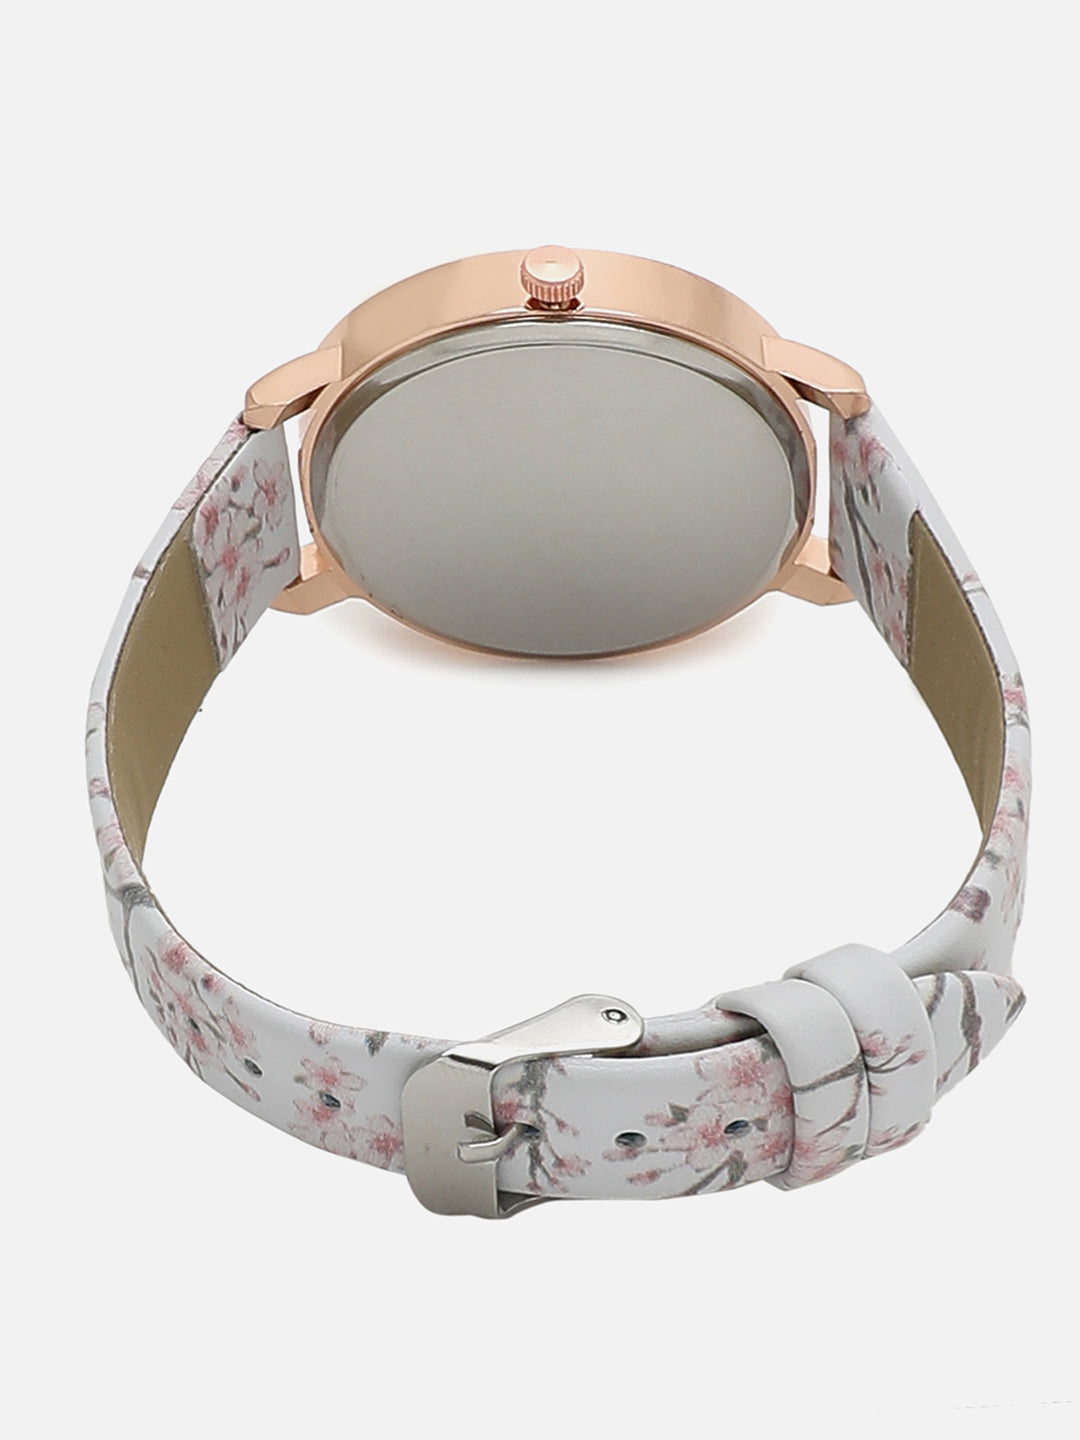 Beige Decorative Analog Round Dial With Floral Printed Leather Strap Watch & Bracelets